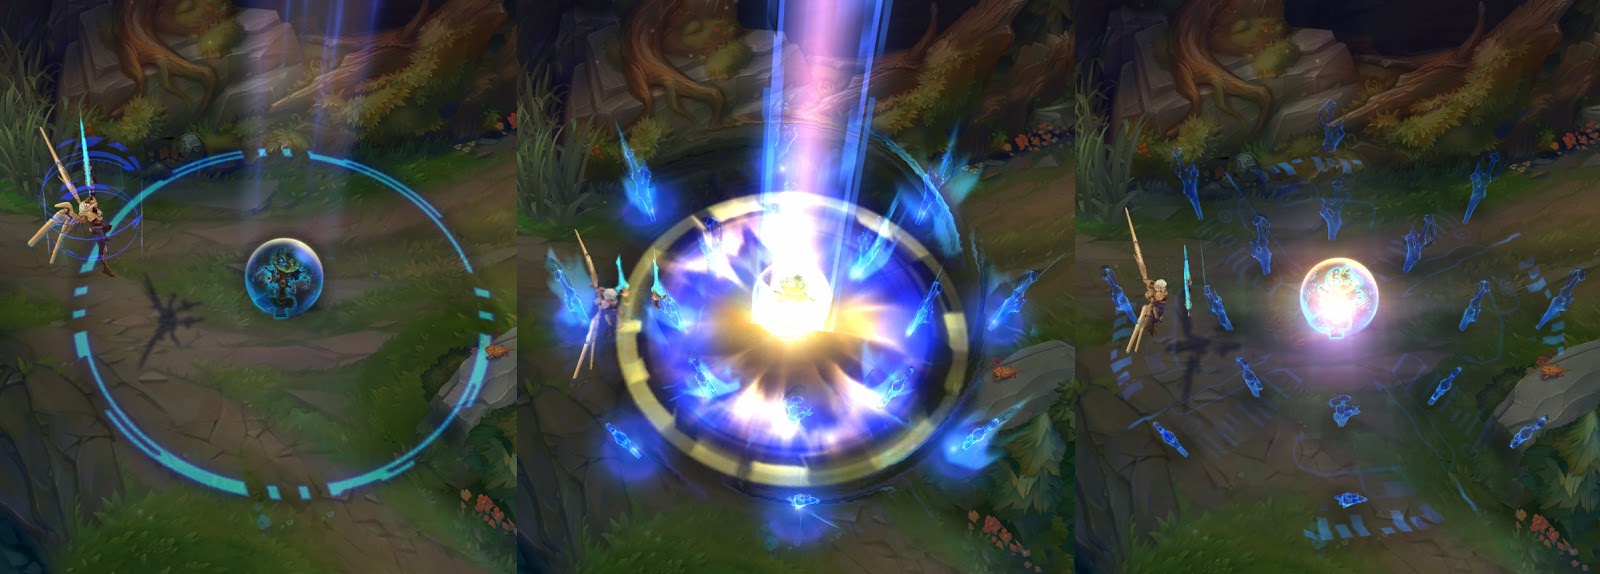 aether wing kayle ultimate